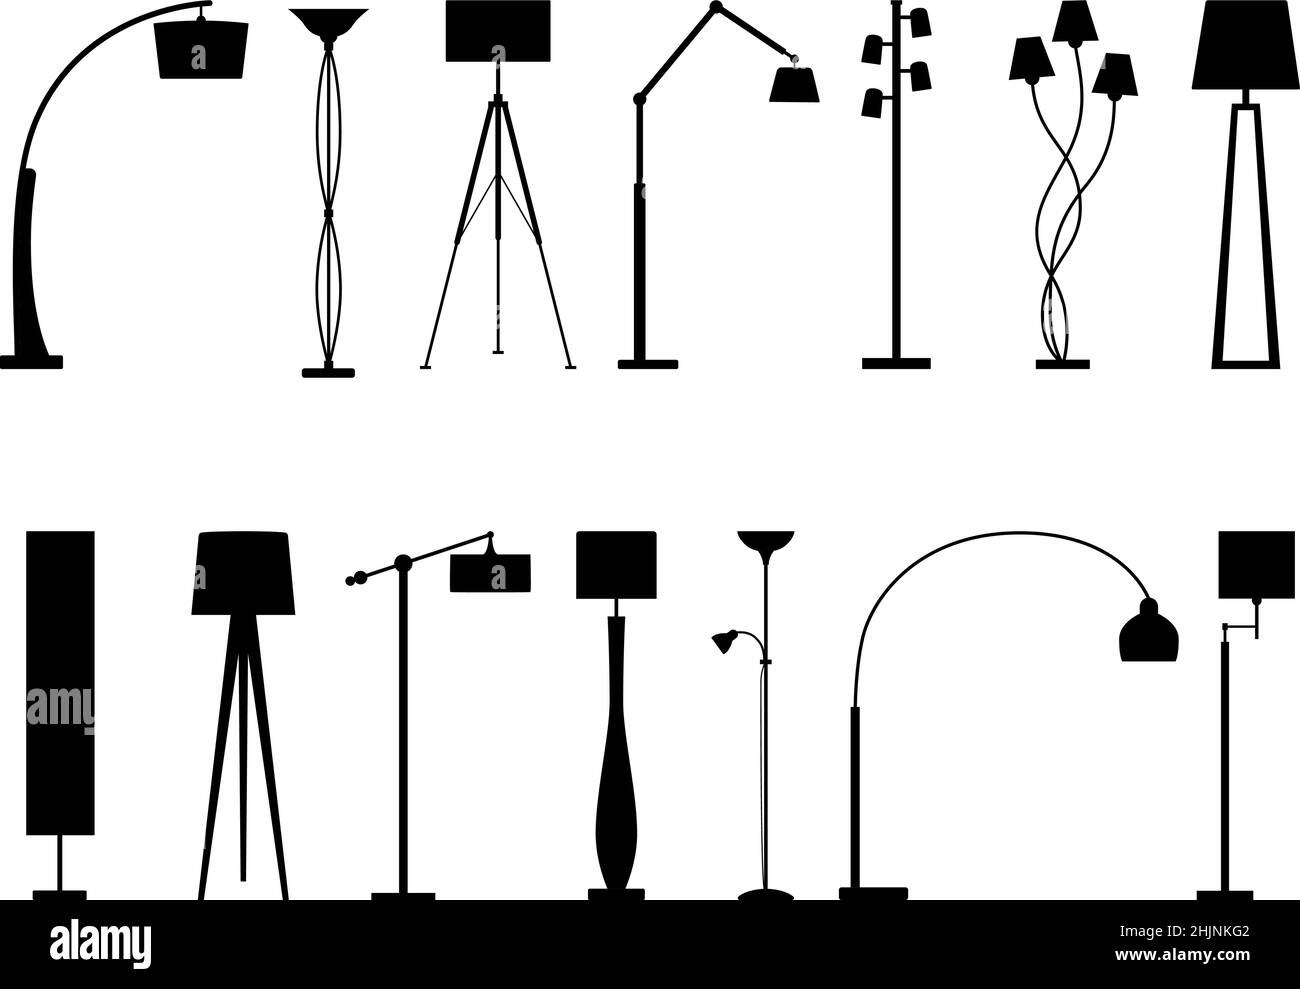 Set of silhouettes of floor lamps, vector illustration Stock Vector